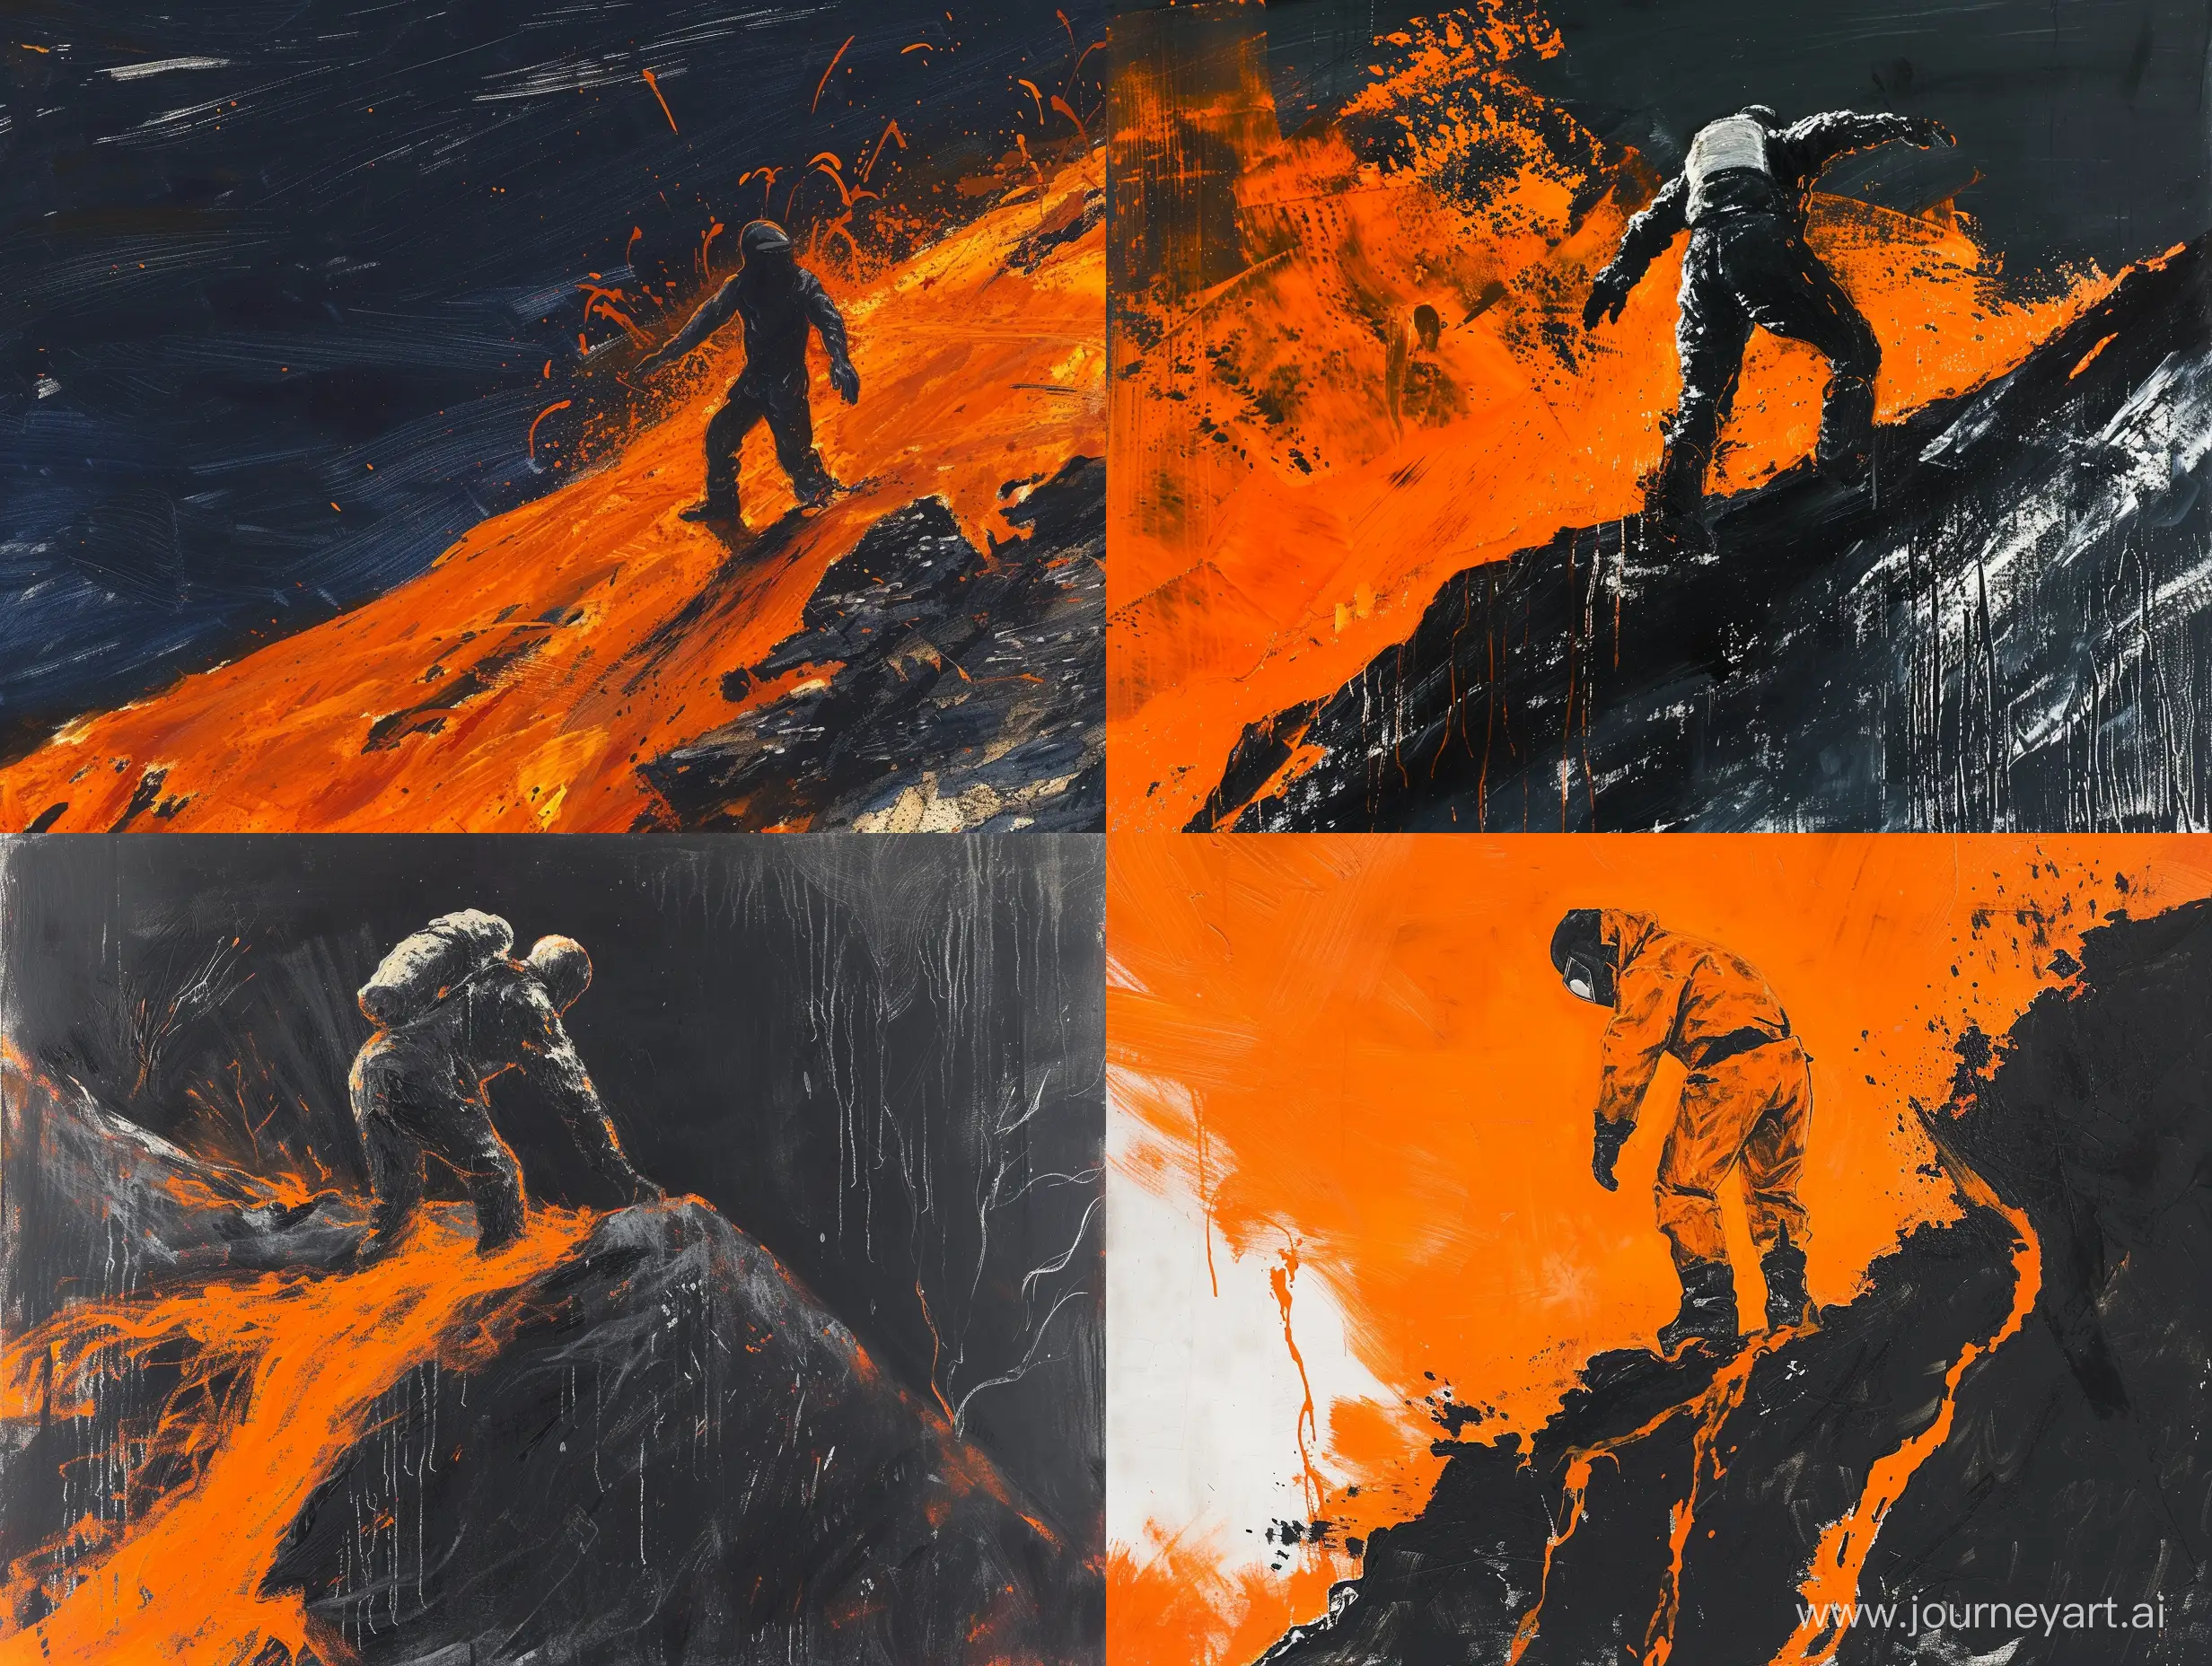 Man-in-Magma-Protective-Suit-Approaches-Volcano-at-Night